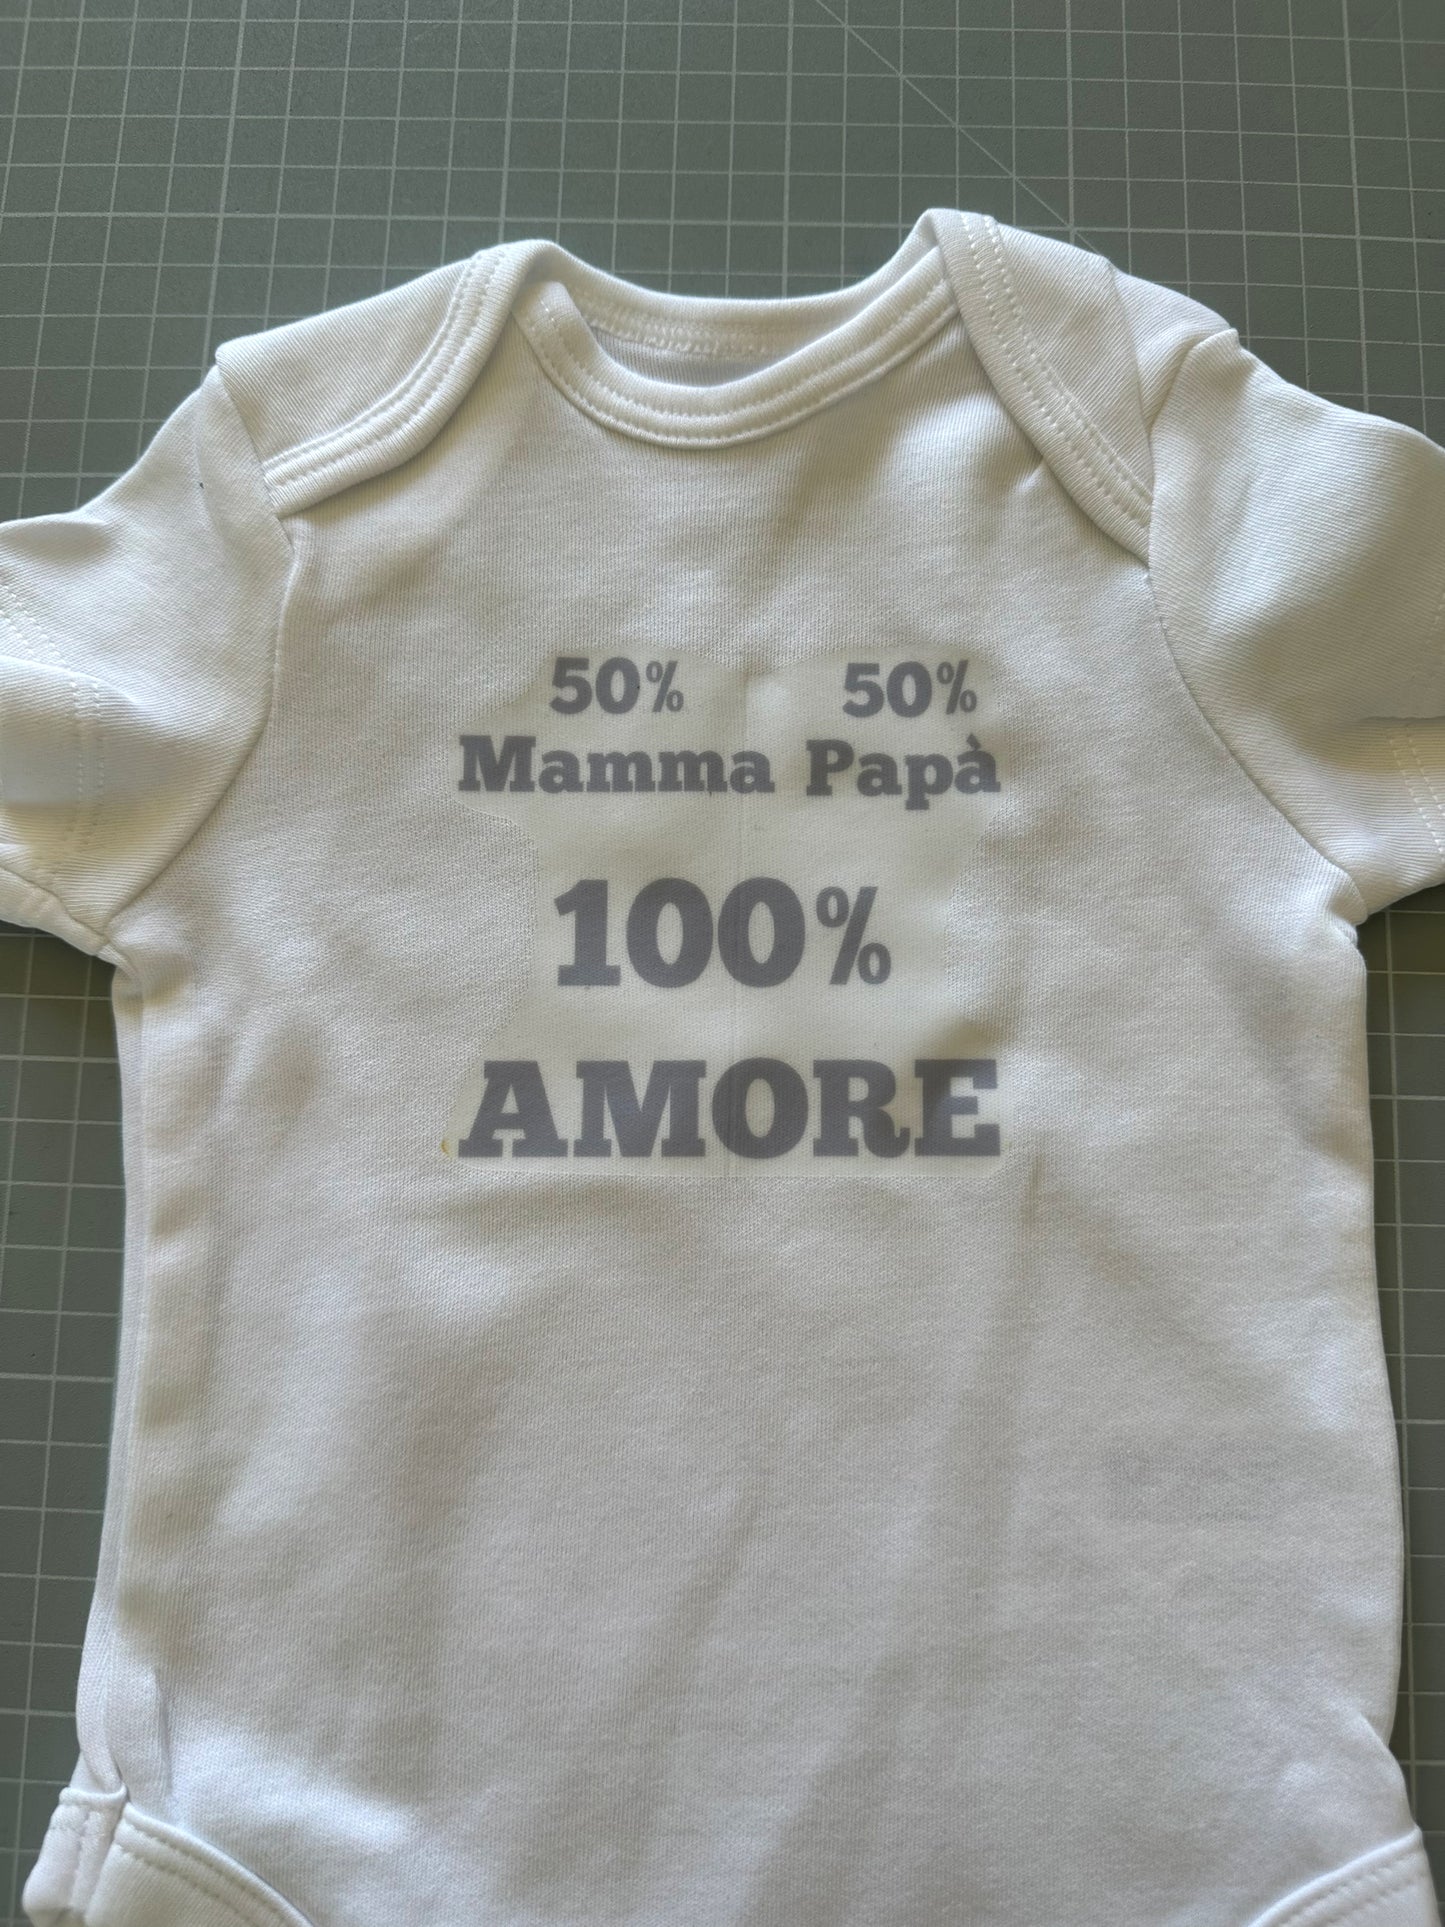 Completino “100% amore”